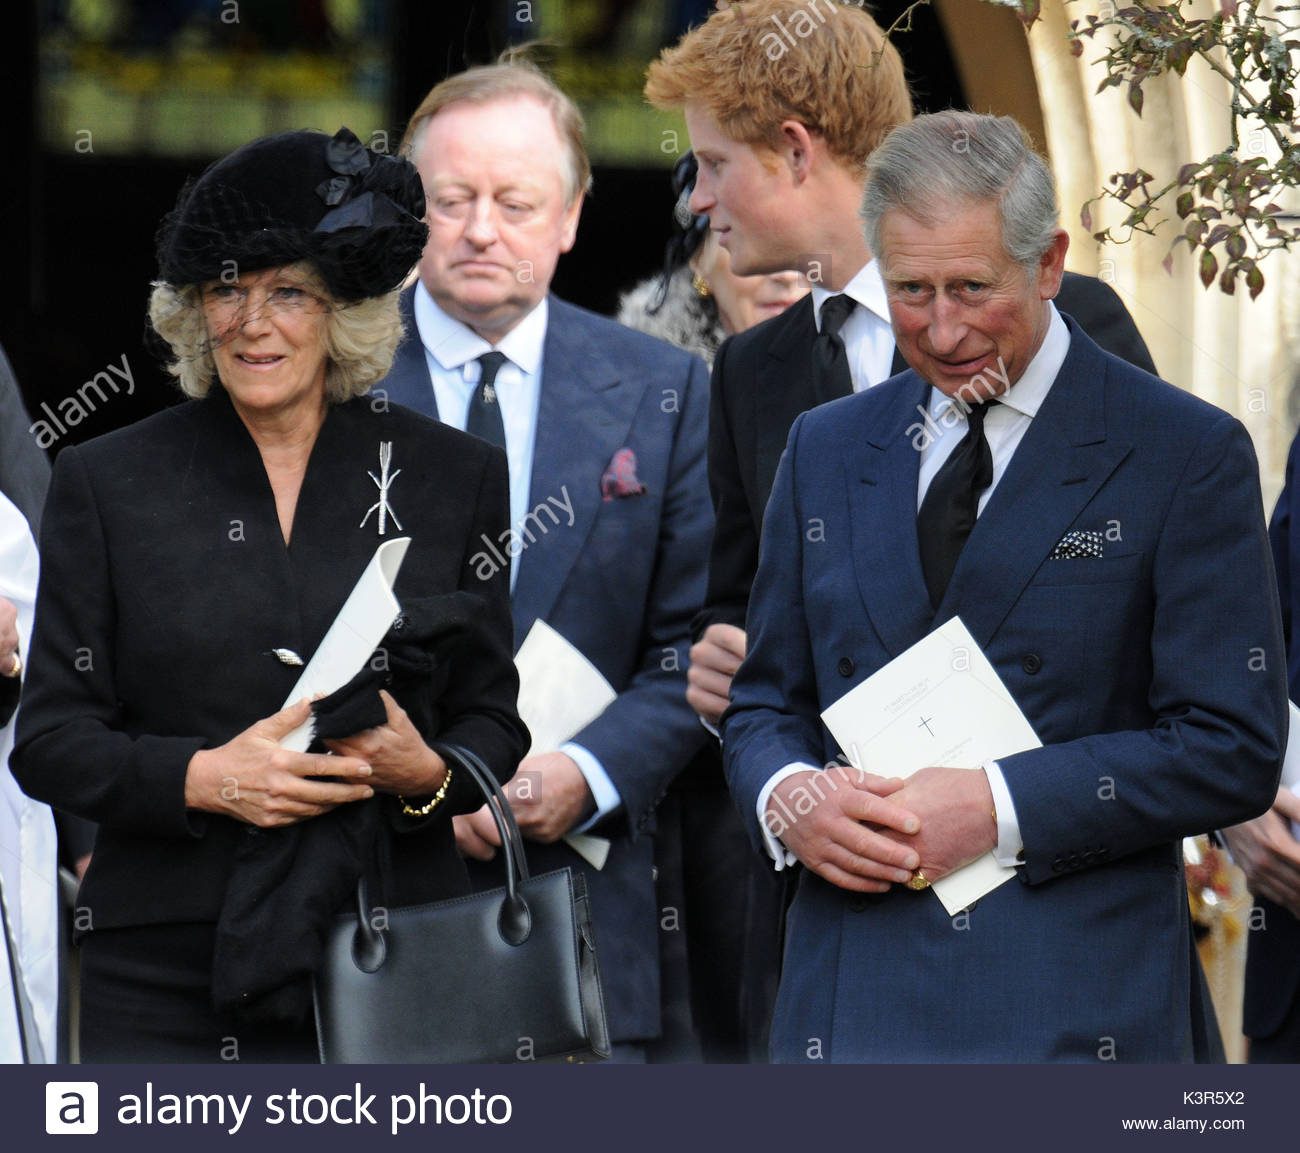 the-duchess-of-cornwall-prince-charles-prince-harry-and-andrew-parker-K3R5X2.jpg